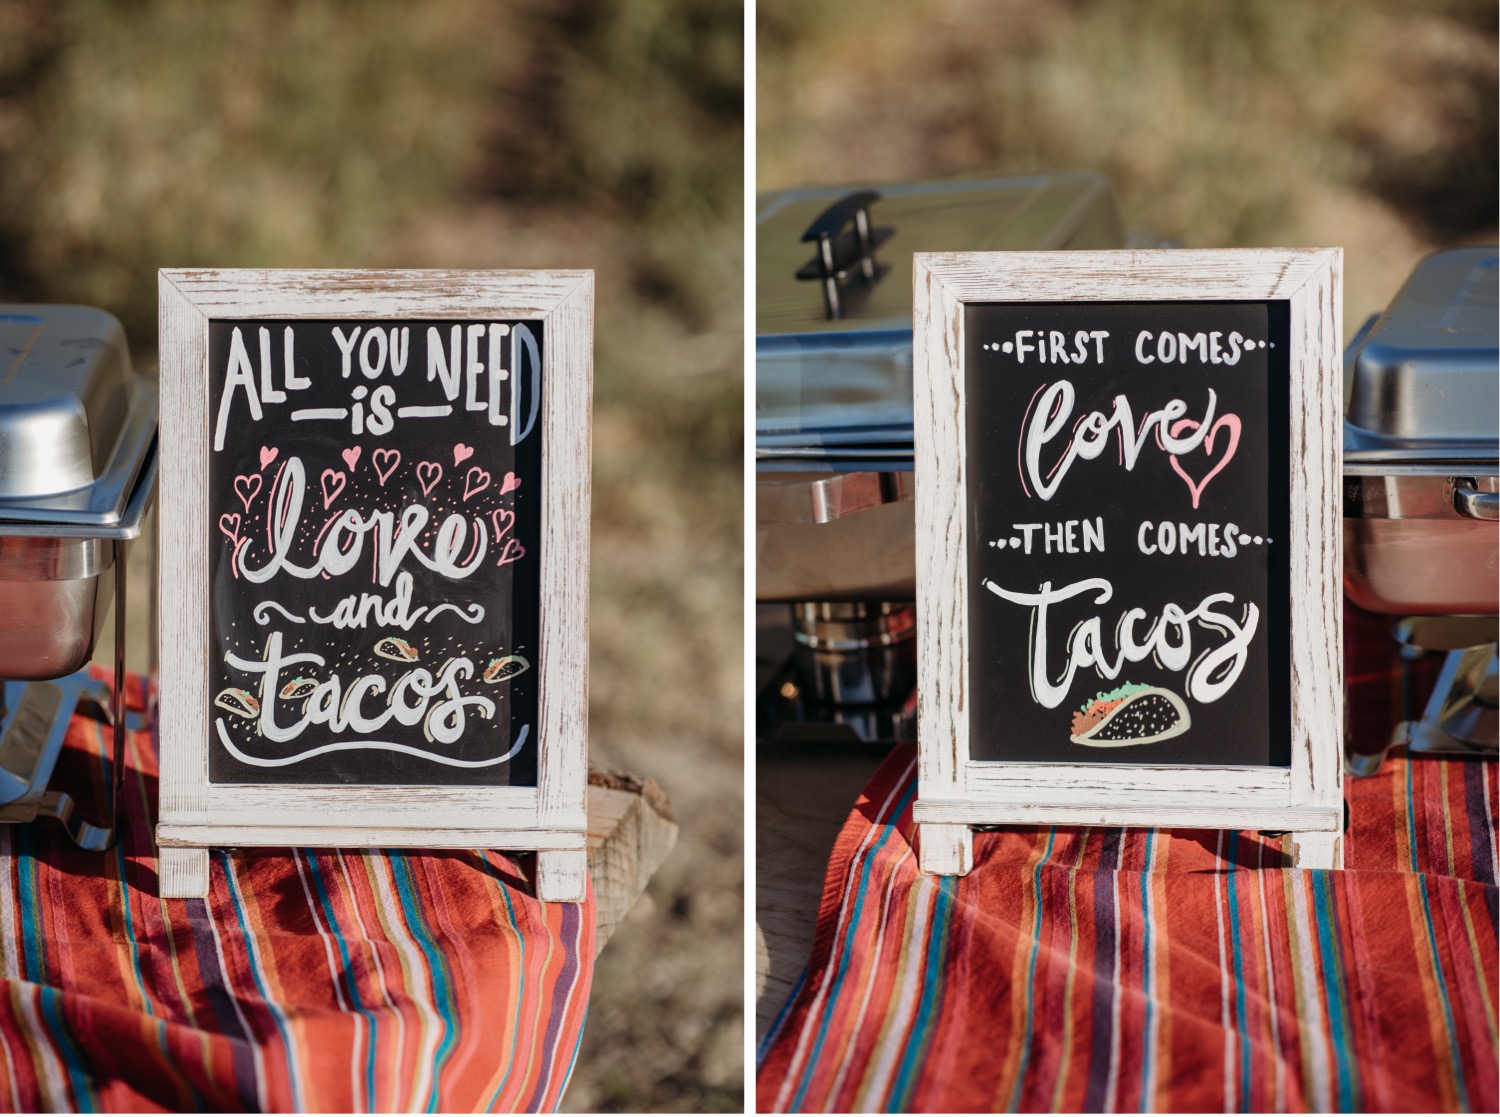 Wedding signs saying "All you need is love and tacos" and "First comes love, then comes tacos". Liz Koston Photography.